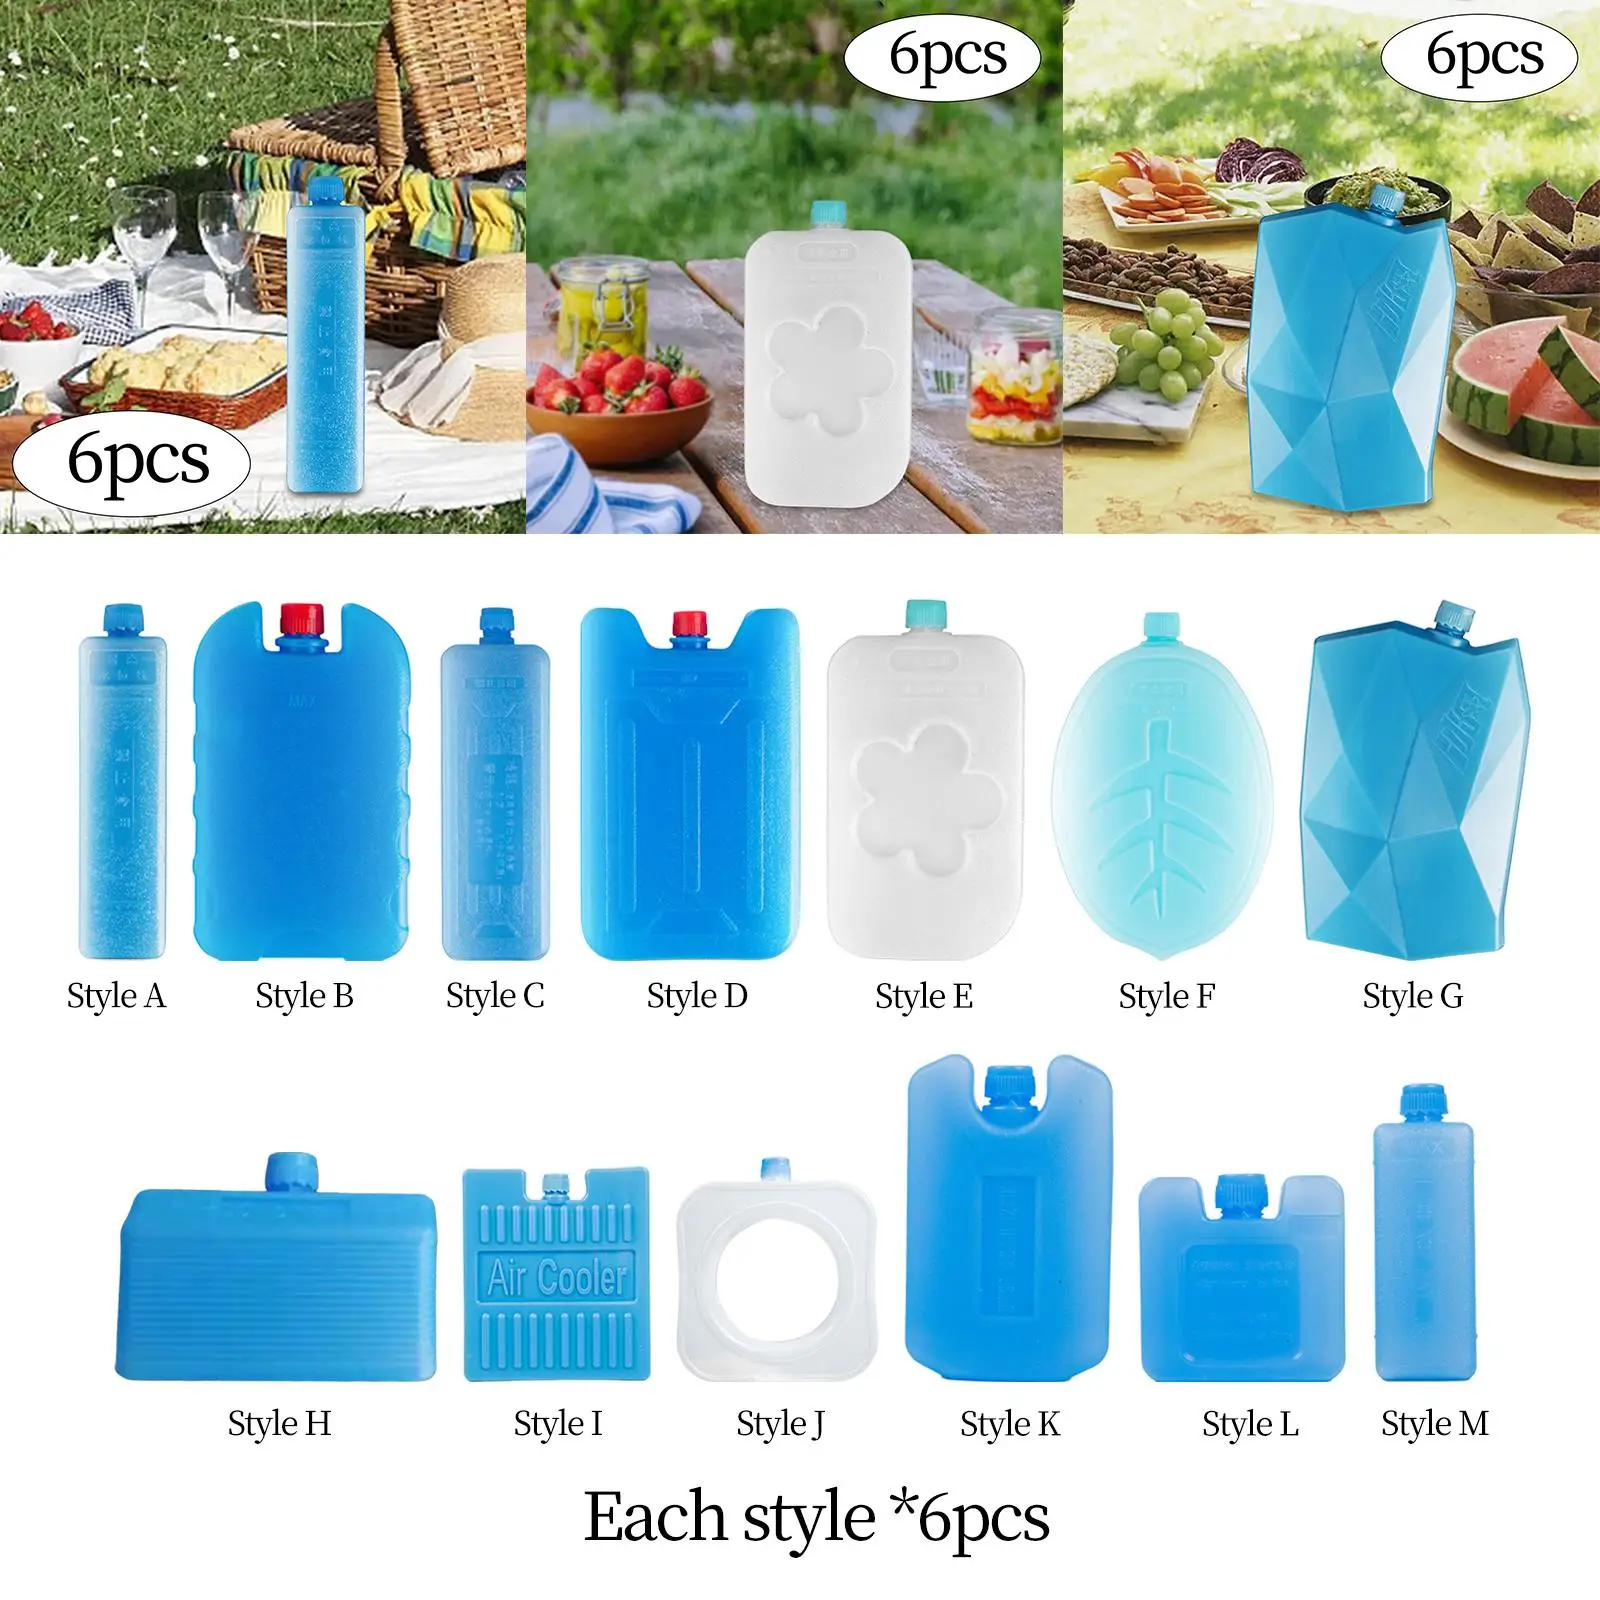 6x Ice Freezer Blocks that Simply Stays Frozen for Longer for Travel Cool Box Cooling Ice Packs Ice Cooler Blocks for Picnic BBQ